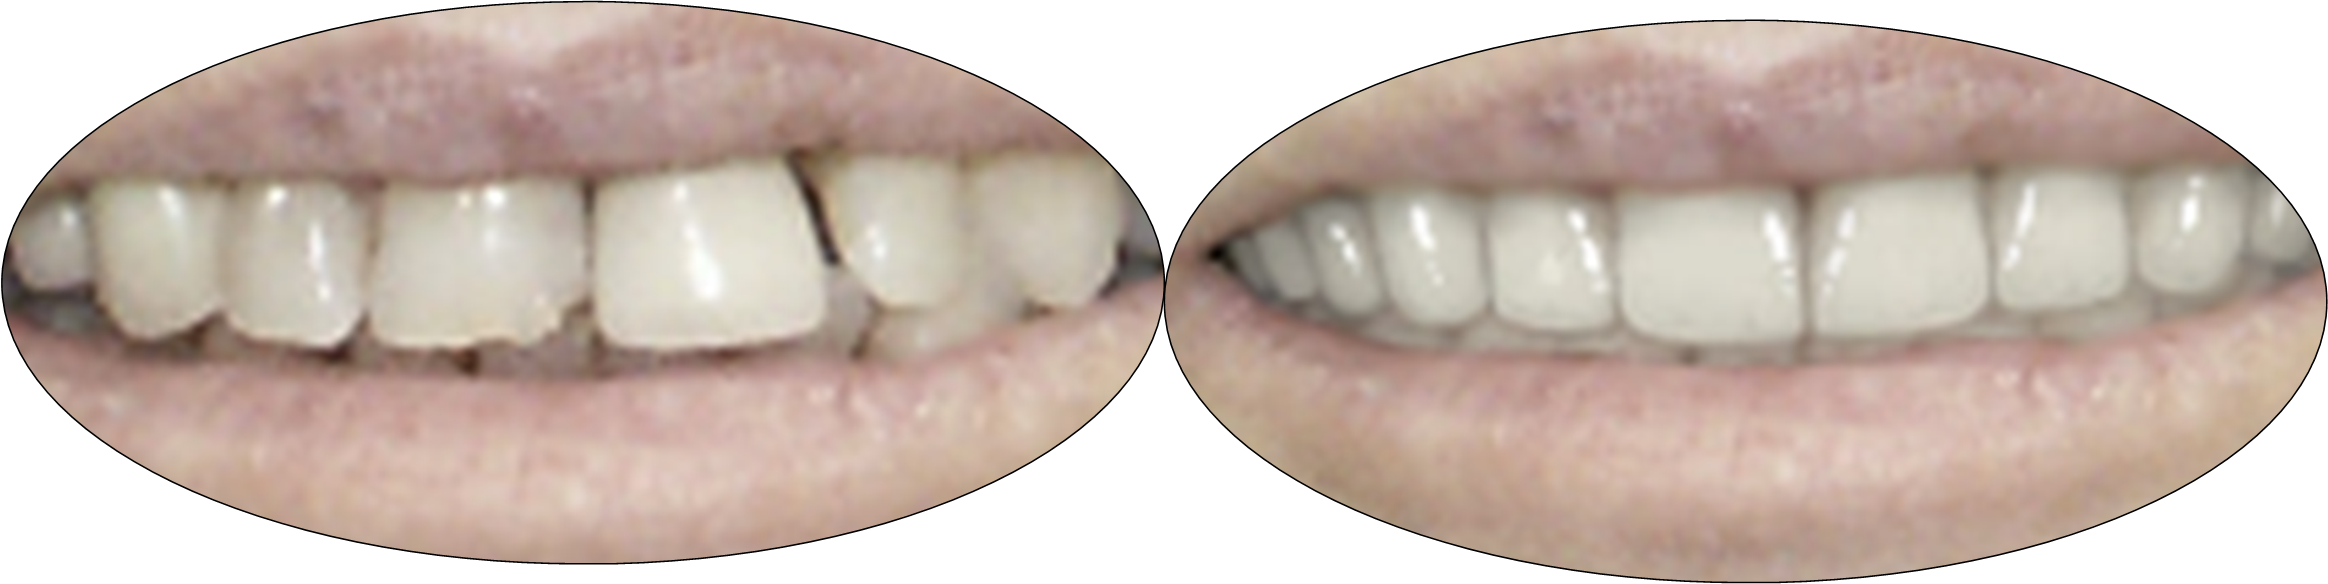 Patient before and after crowns and porcelain veneers